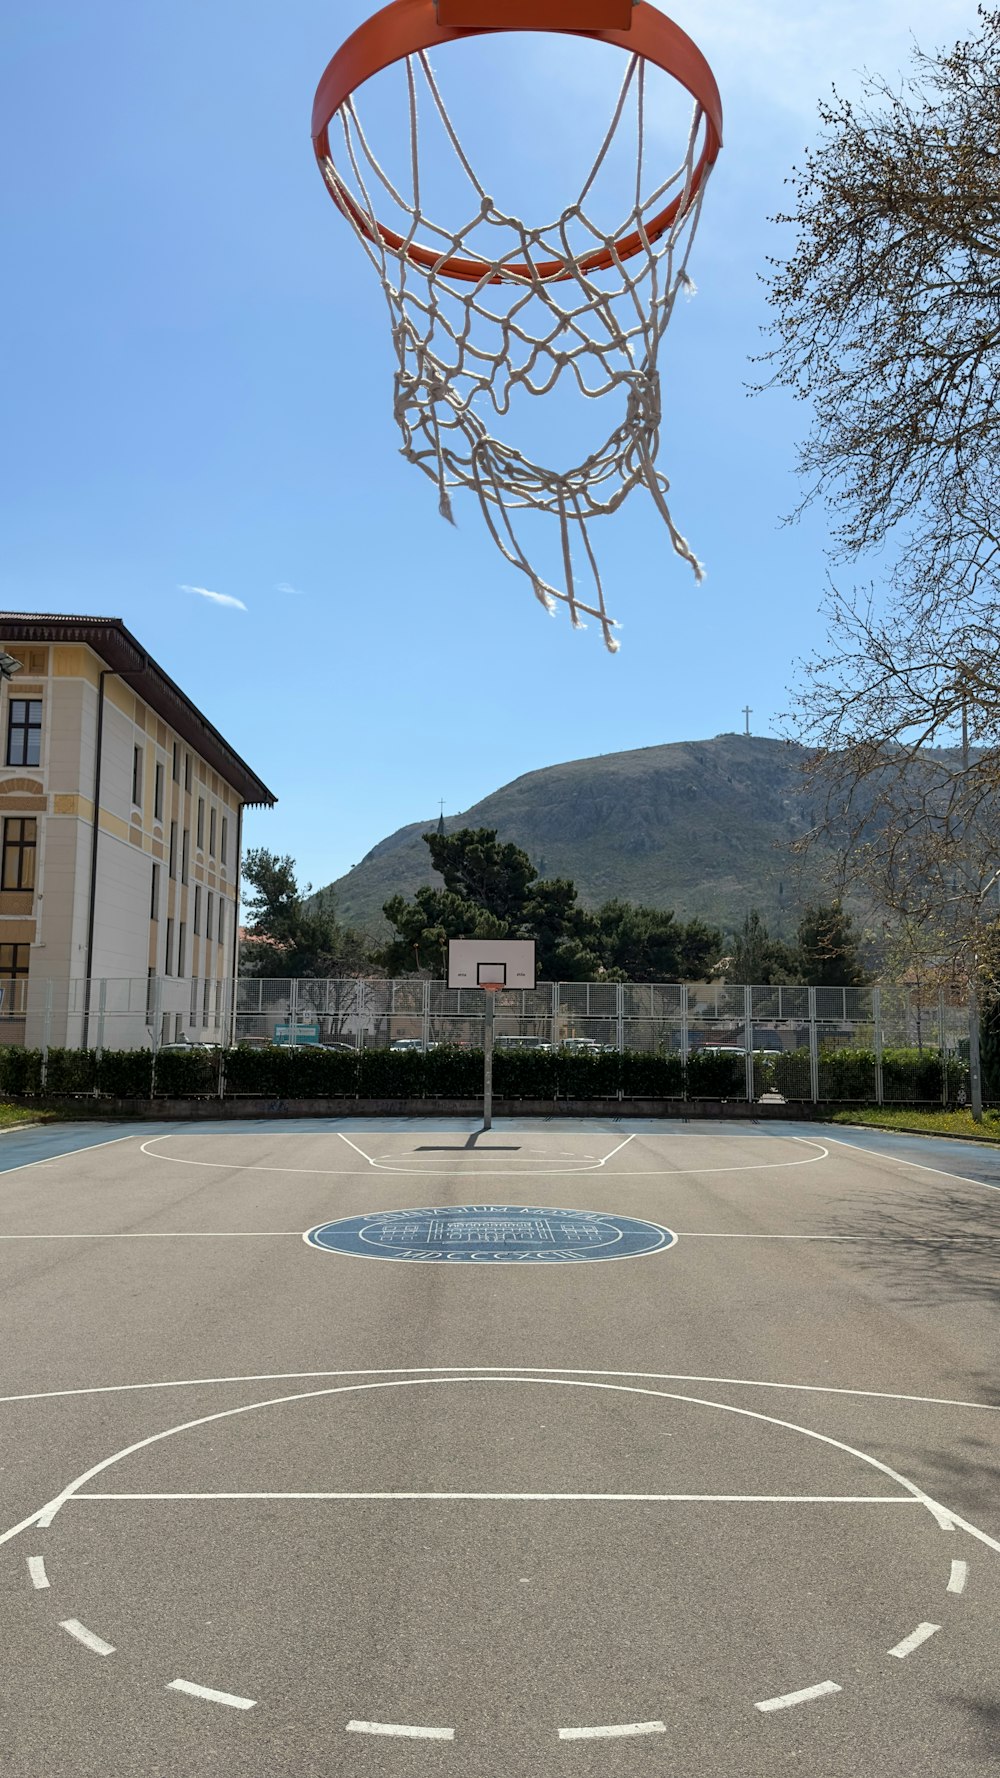 a basketball court with a basketball hoop in the air